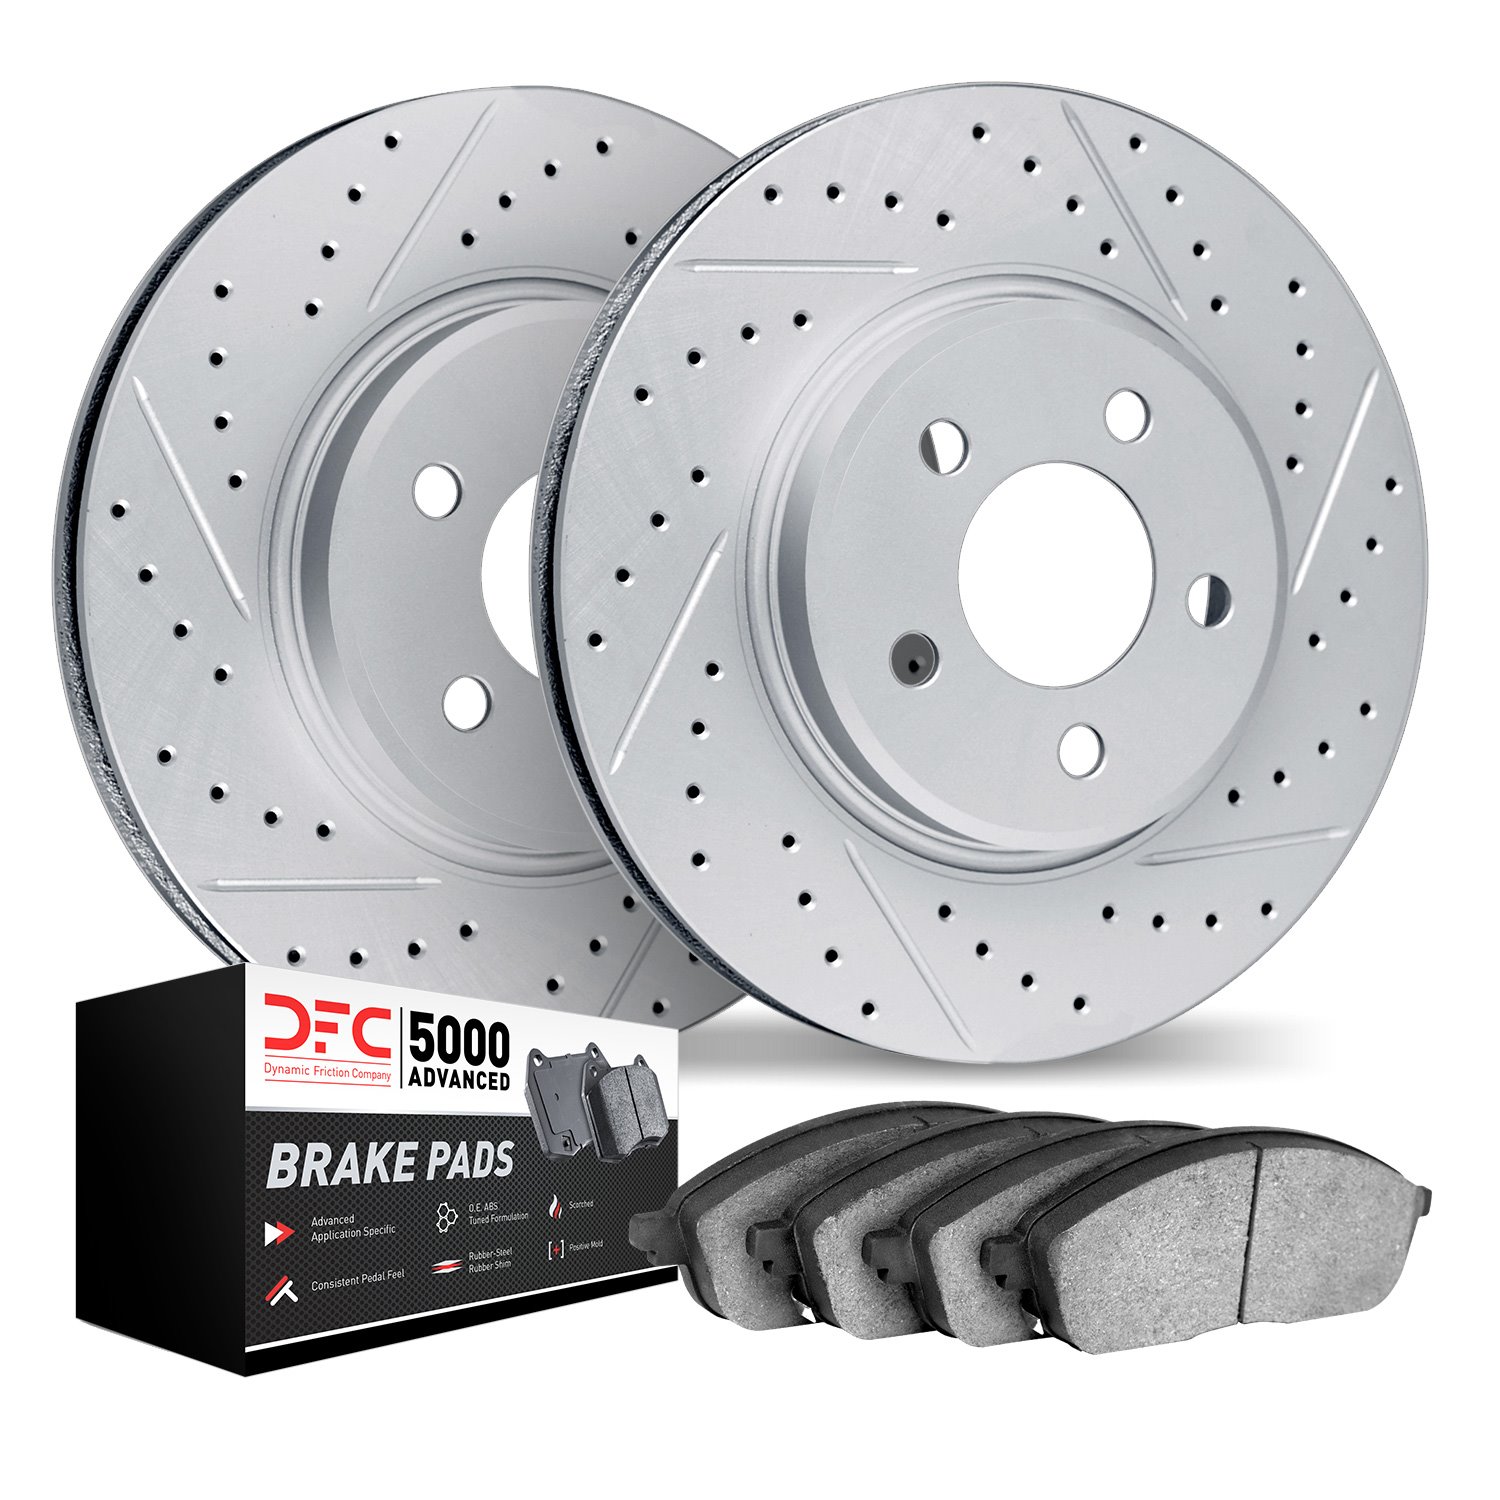 2502-13049 Geoperformance Drilled/Slotted Rotors w/5000 Advanced Brake Pads Kit, Fits Select Subaru, Position: Front